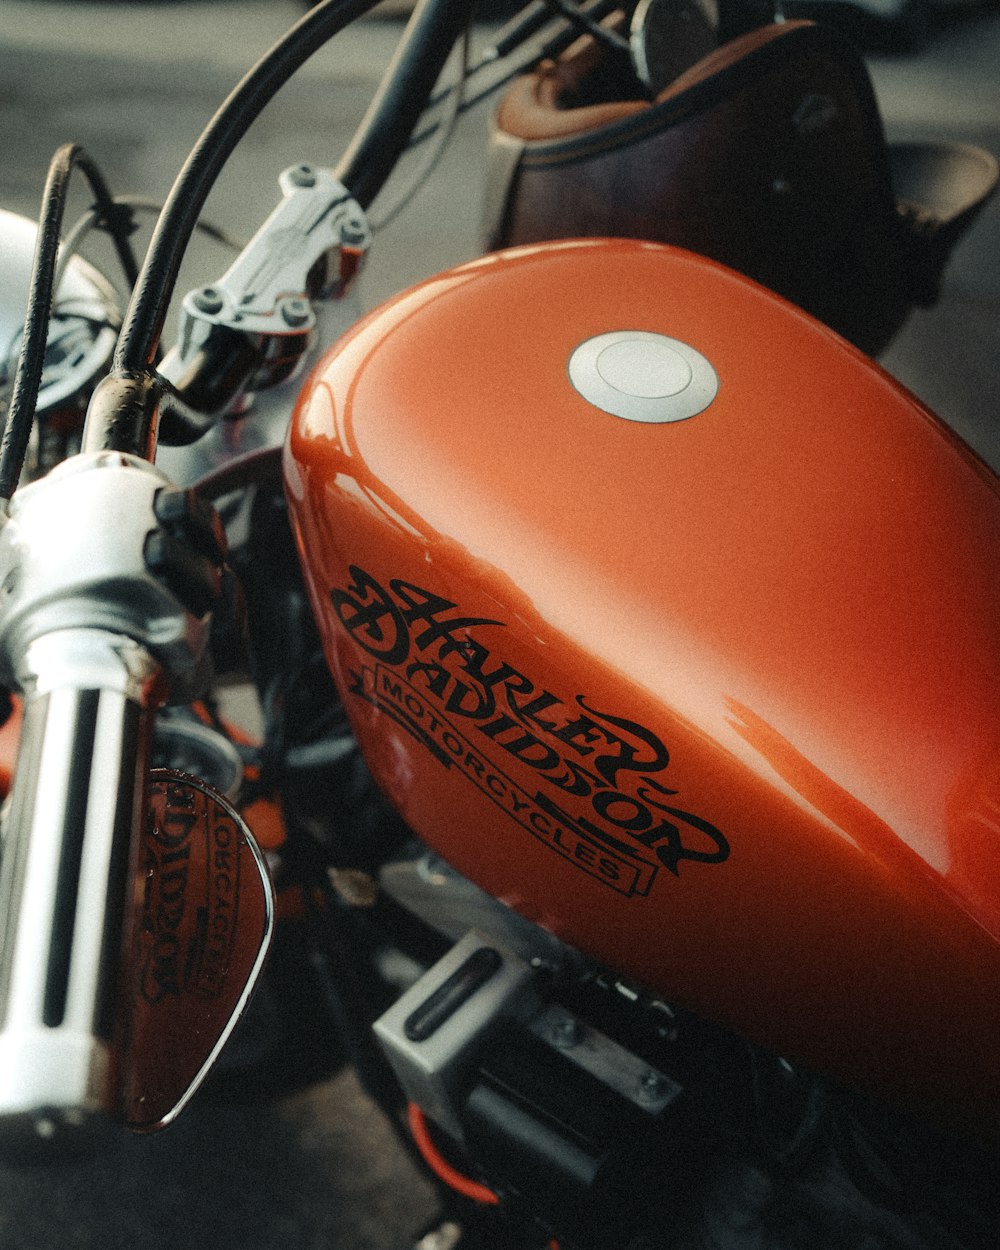 a close-up of a motorcycle